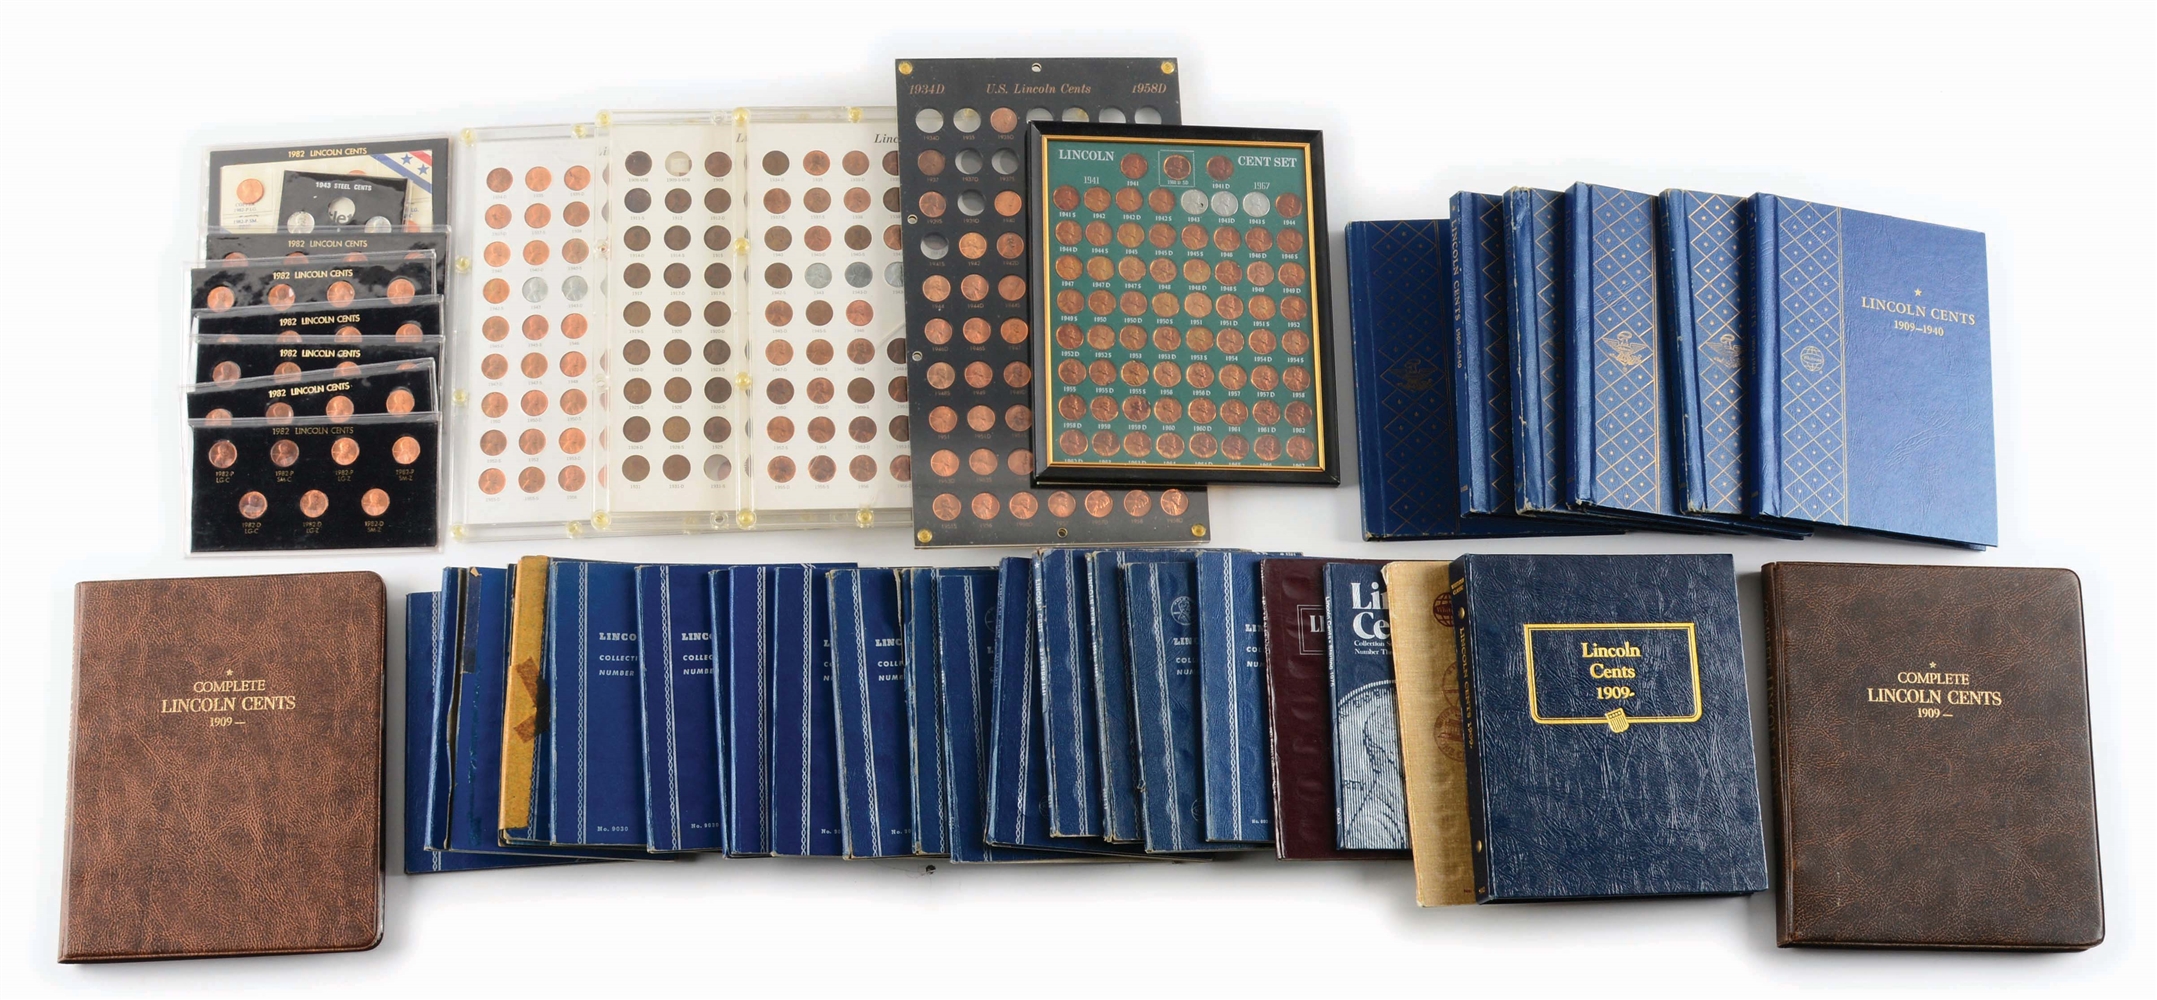 MASSIVE LOT OF LINCOLN CENTS, OVER 20 ALBUMS, 5 PLASTIC FRAMES & OTHERS.